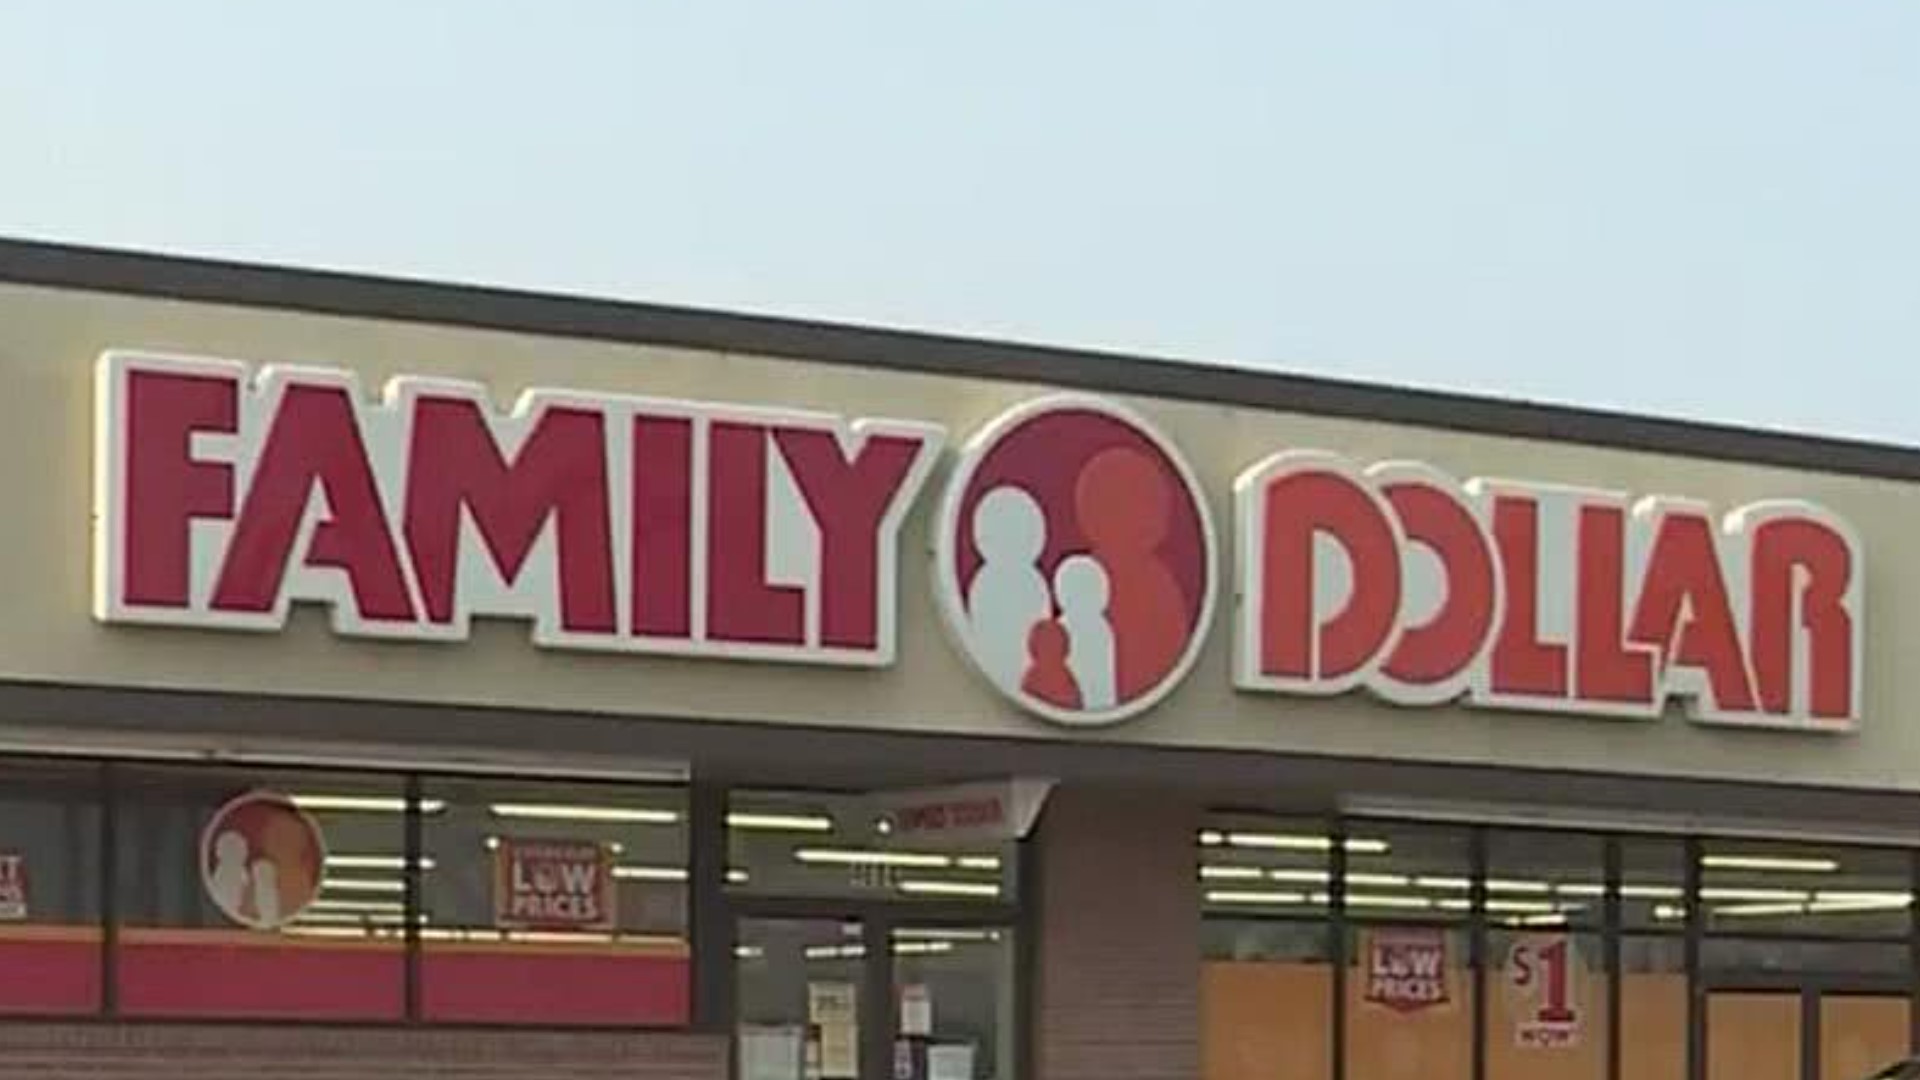 After fumigating a Family Dollar distribution facility in Arkansas, inspectors found more than 1,100 dead rodents.